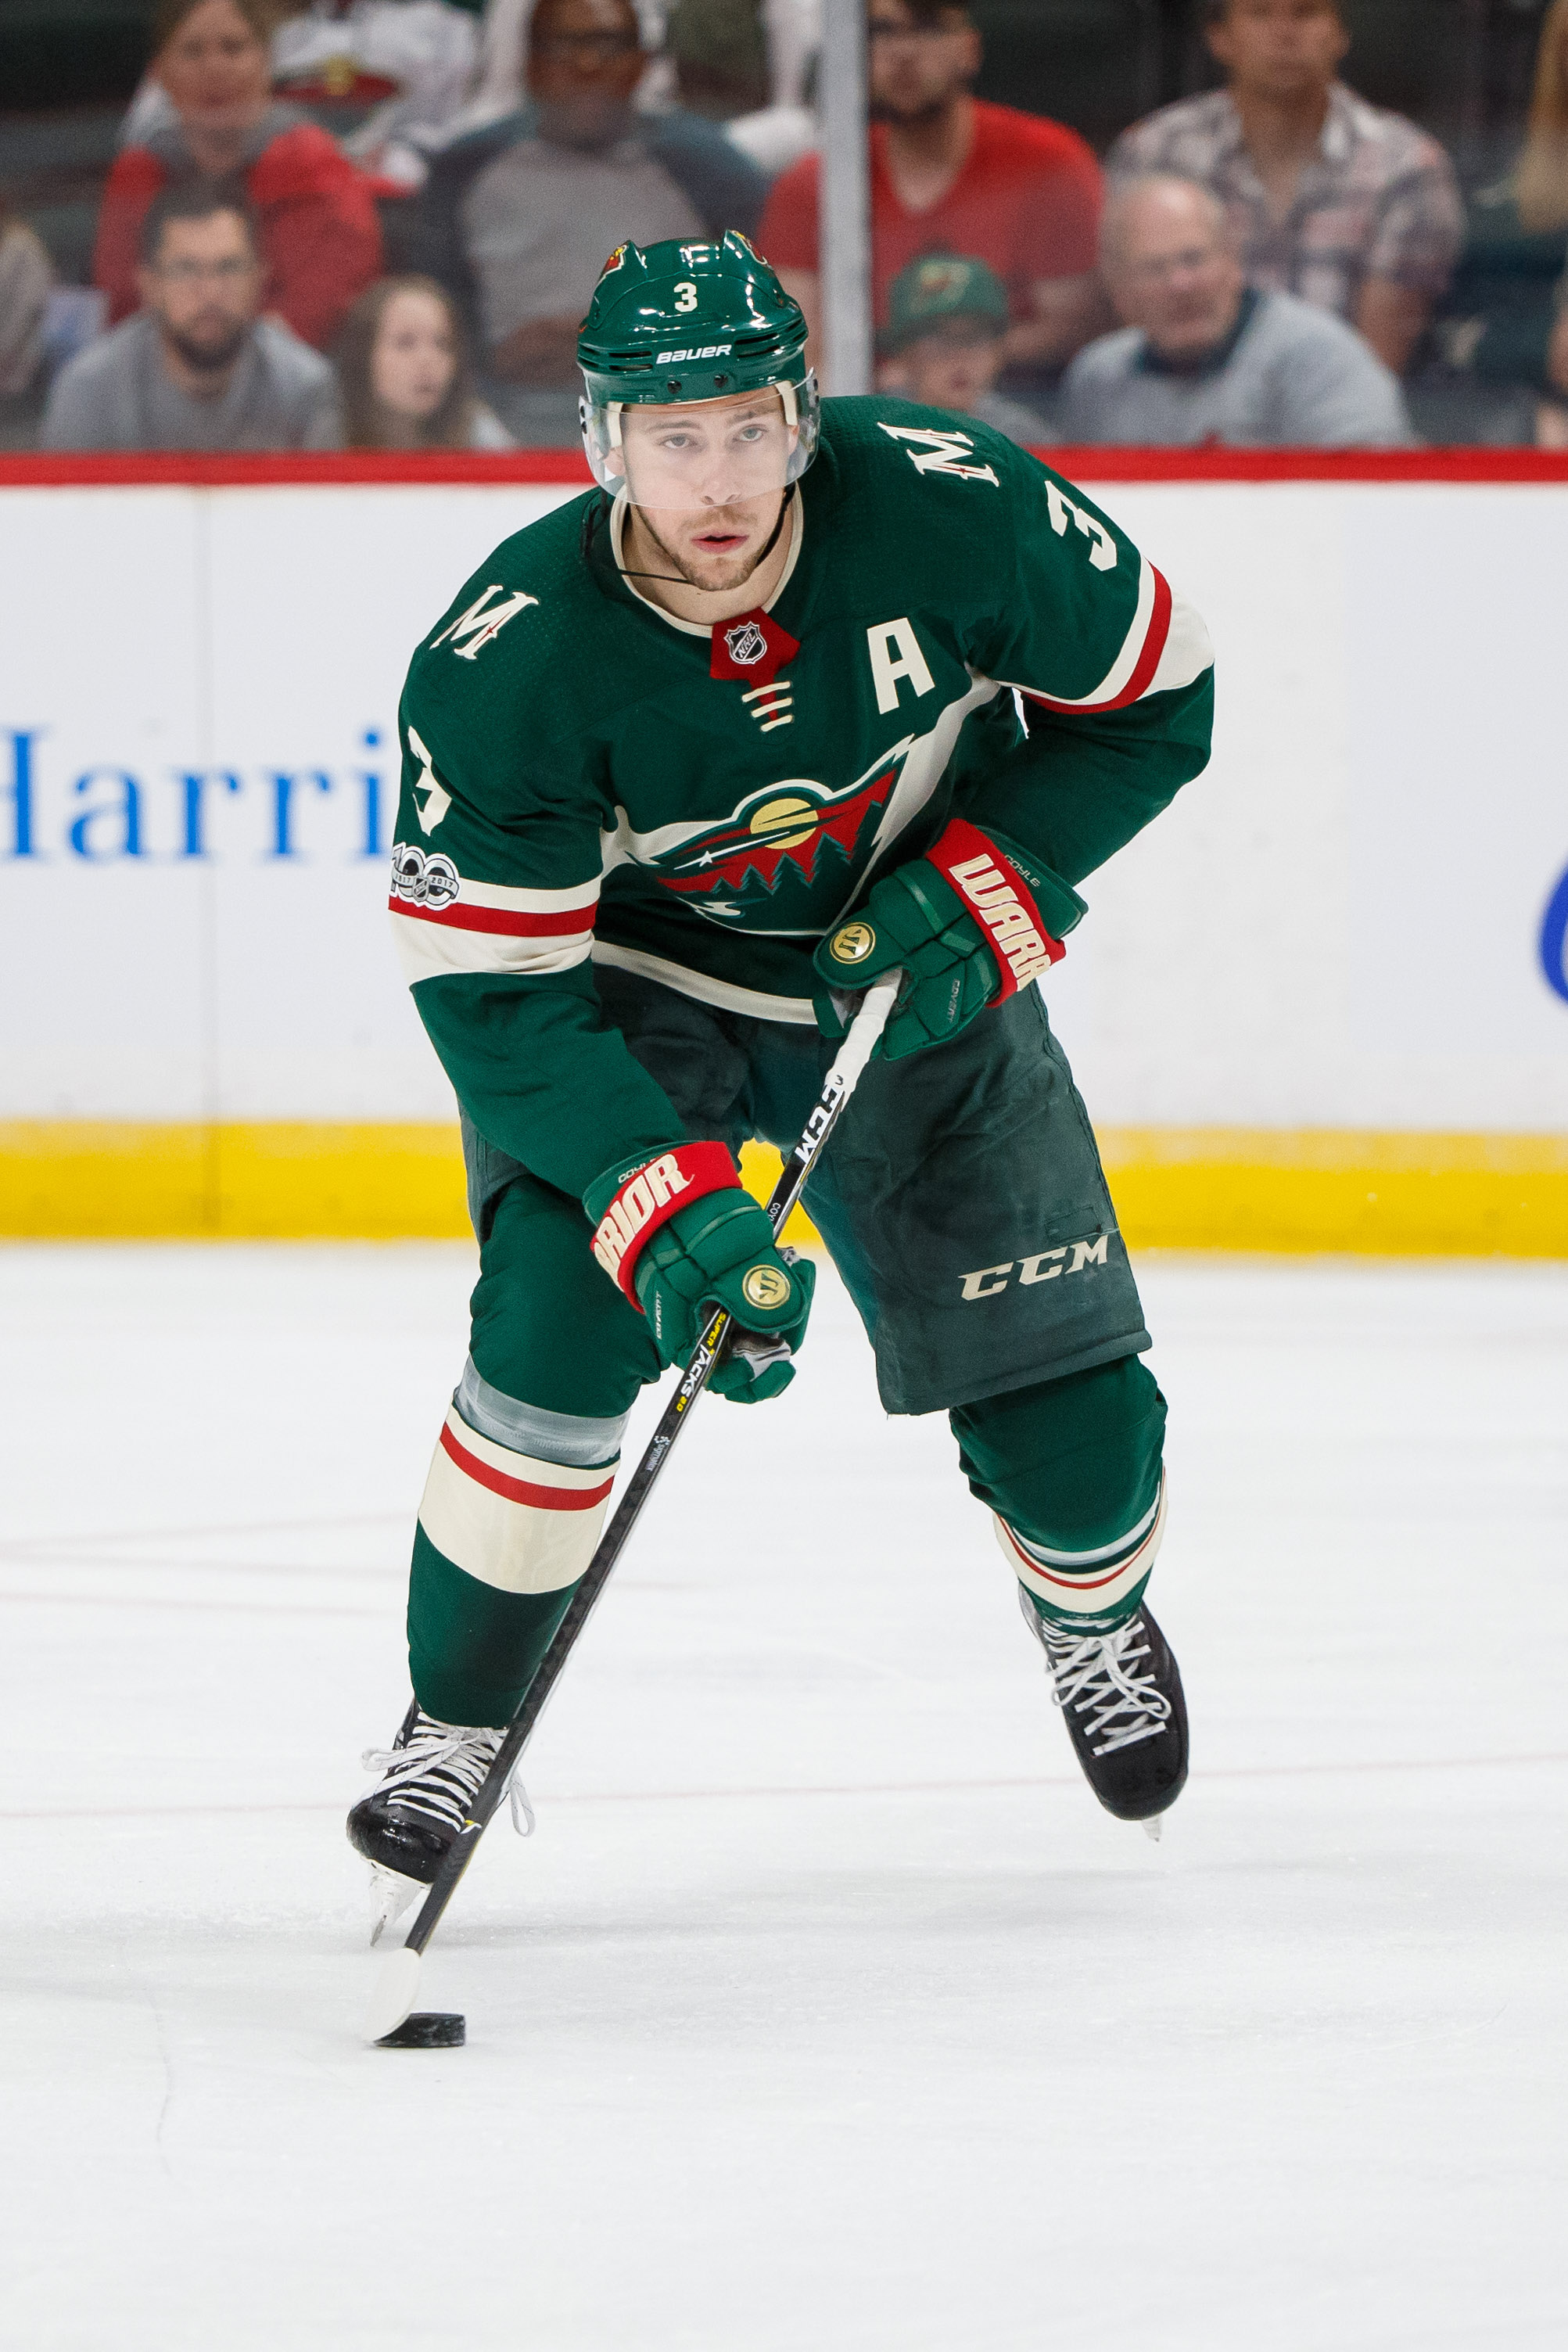 Bruins acquire Charlie Coyle from Wild for Ryan Donato - The Boston Globe